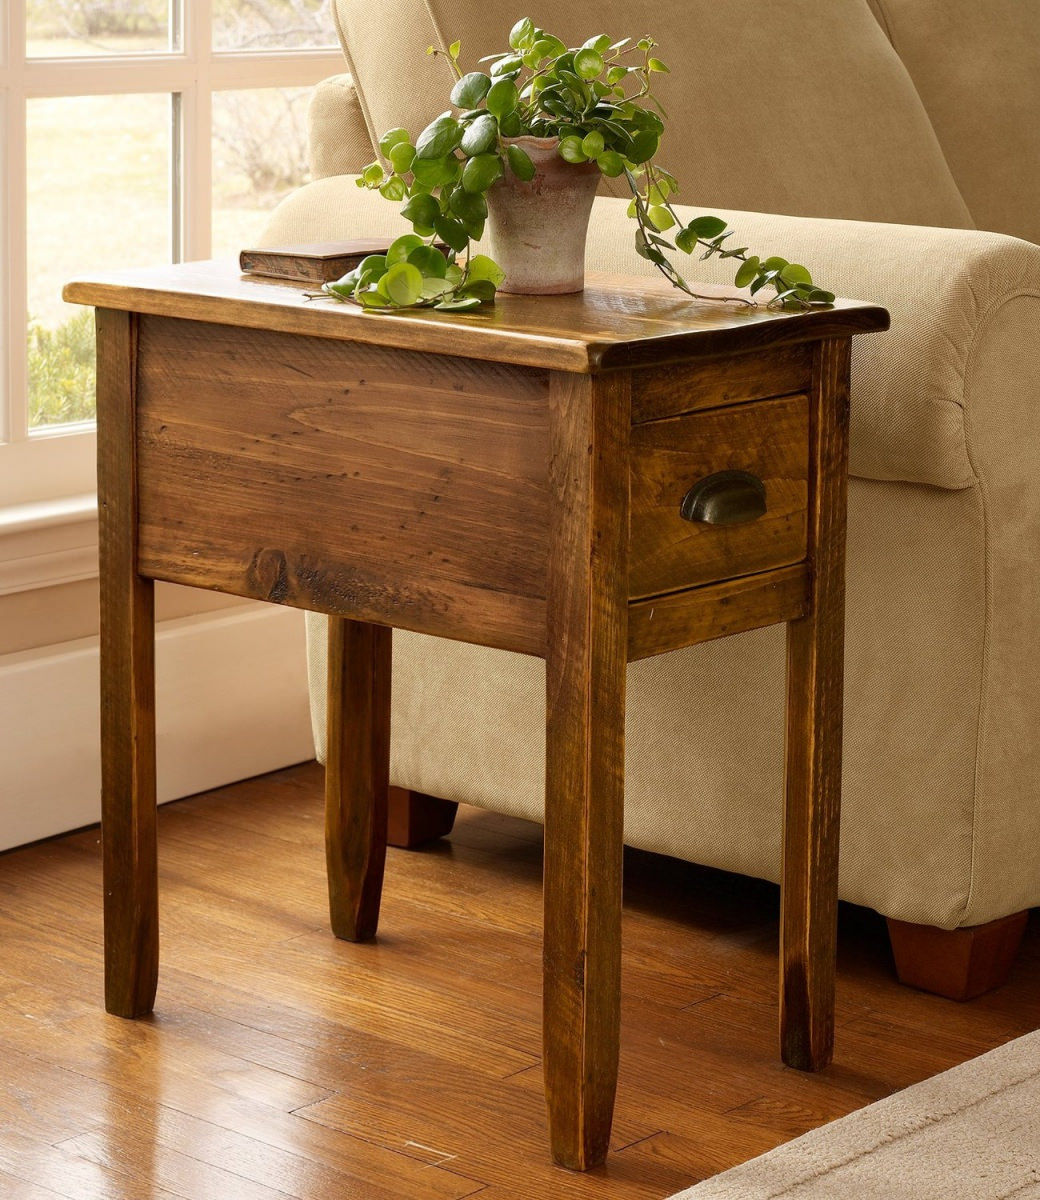 I need 2 end tables rustic wooden side table end